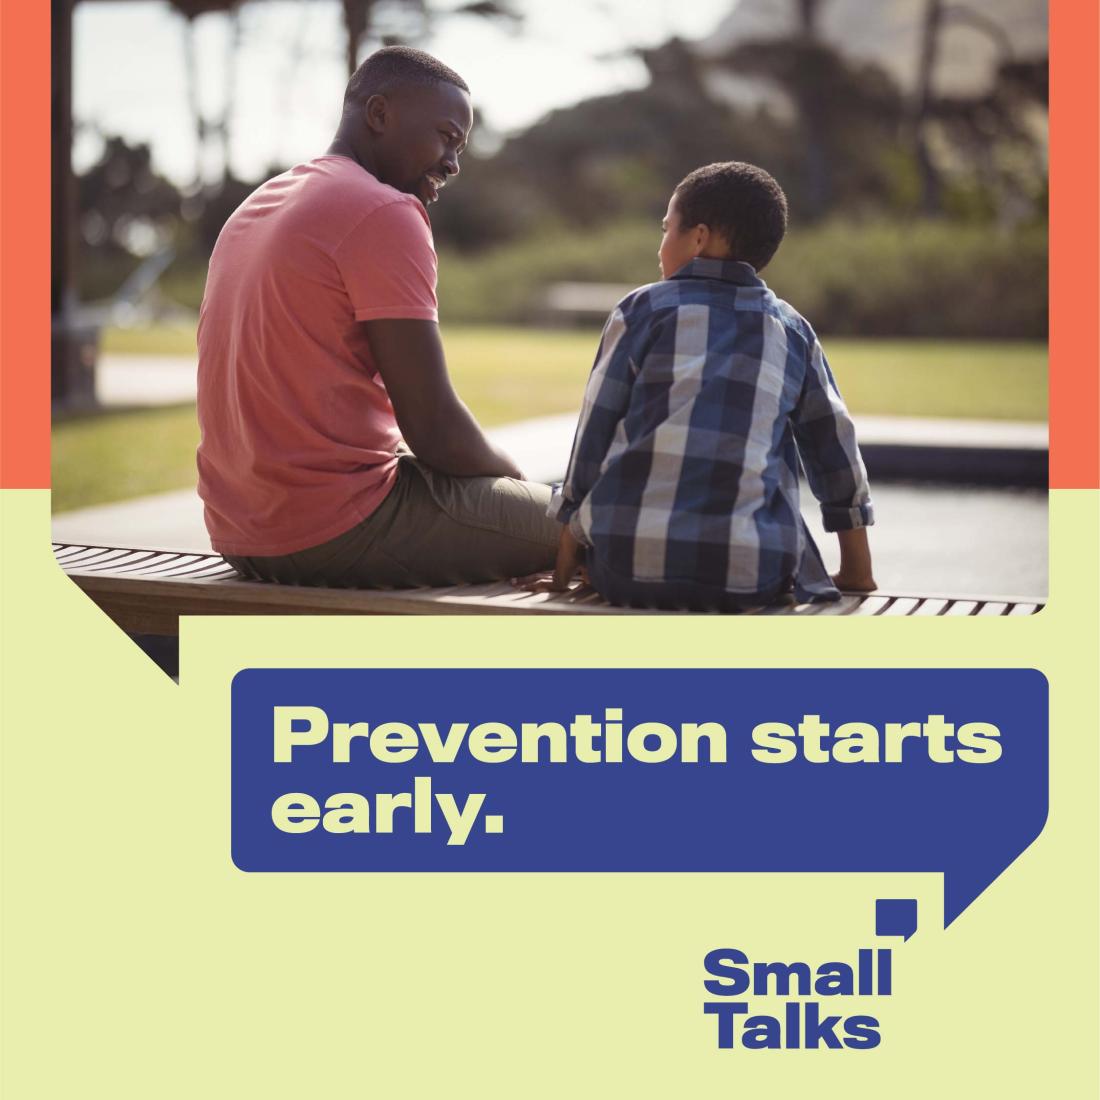 Prevention starts early